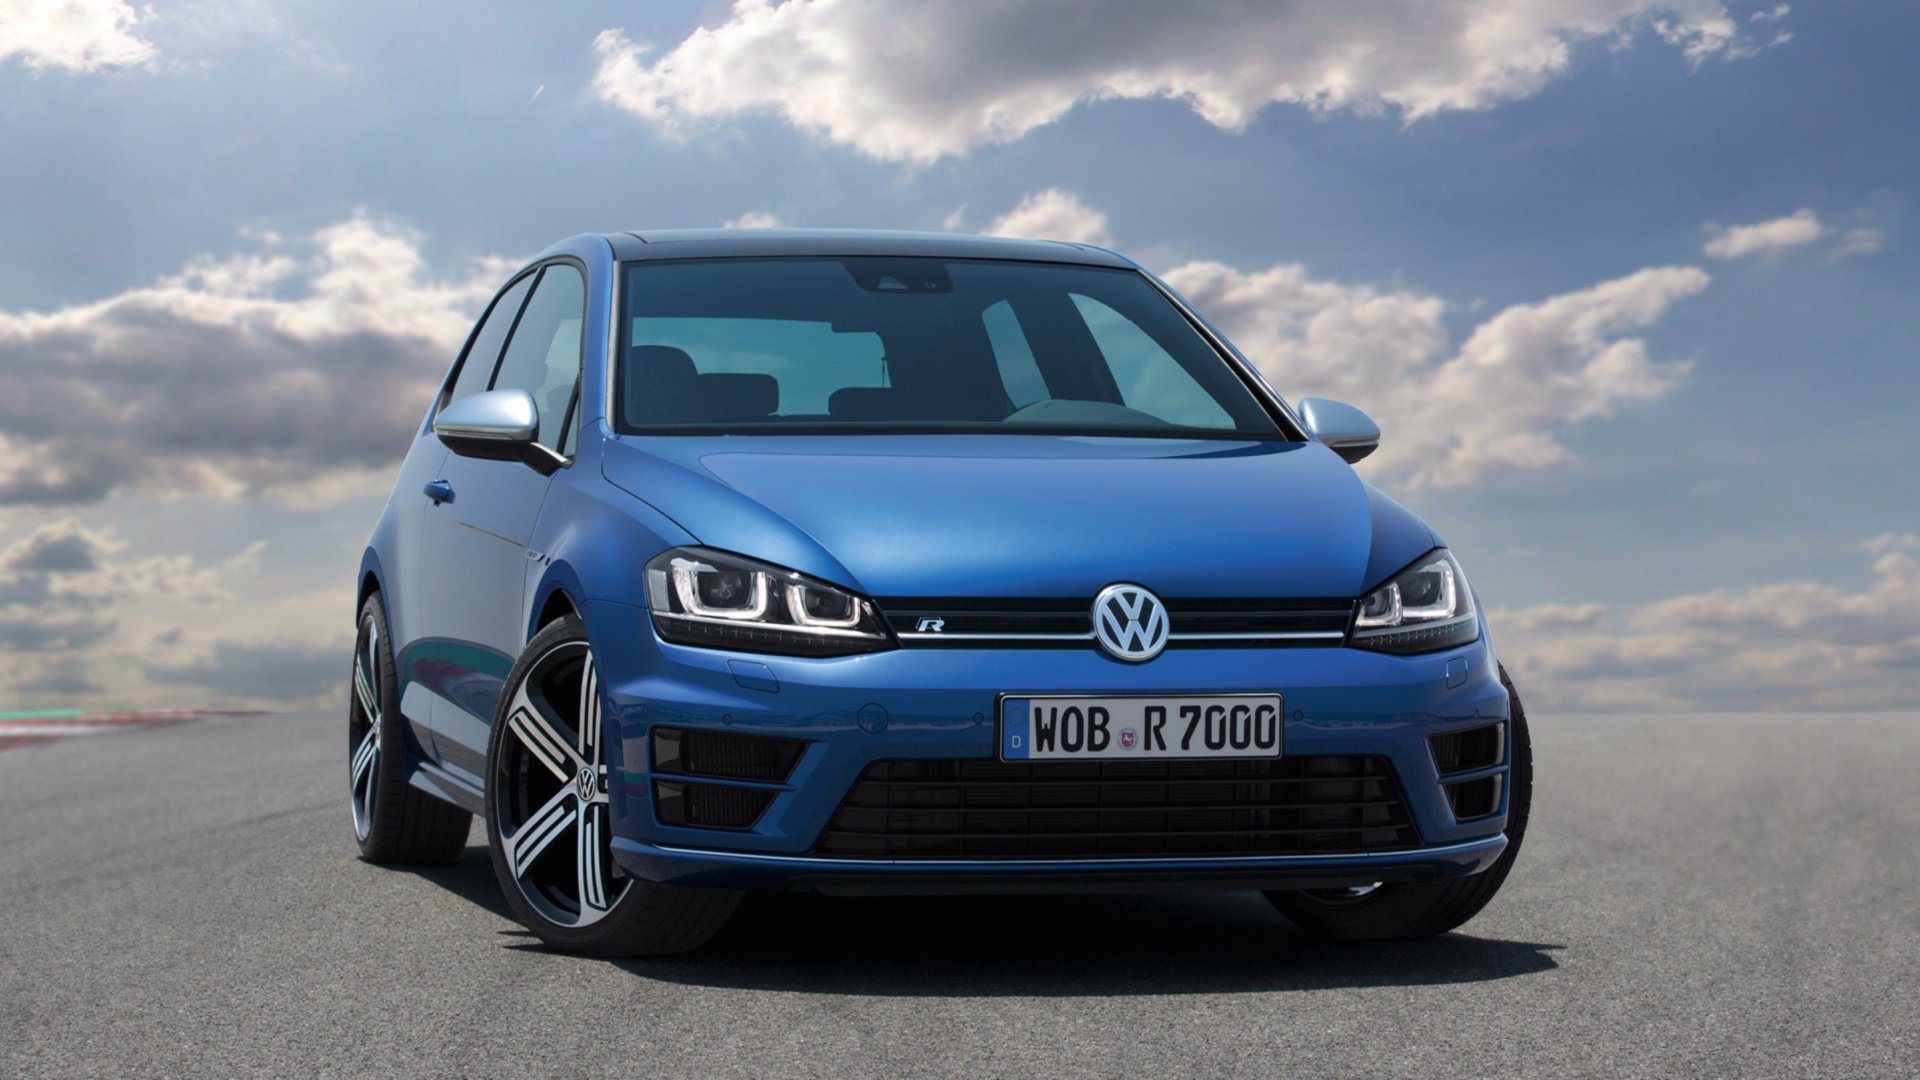 Awesome Volkswagen Golf R free wallpaper ID:383559 for full hd 1920x1080 desktop